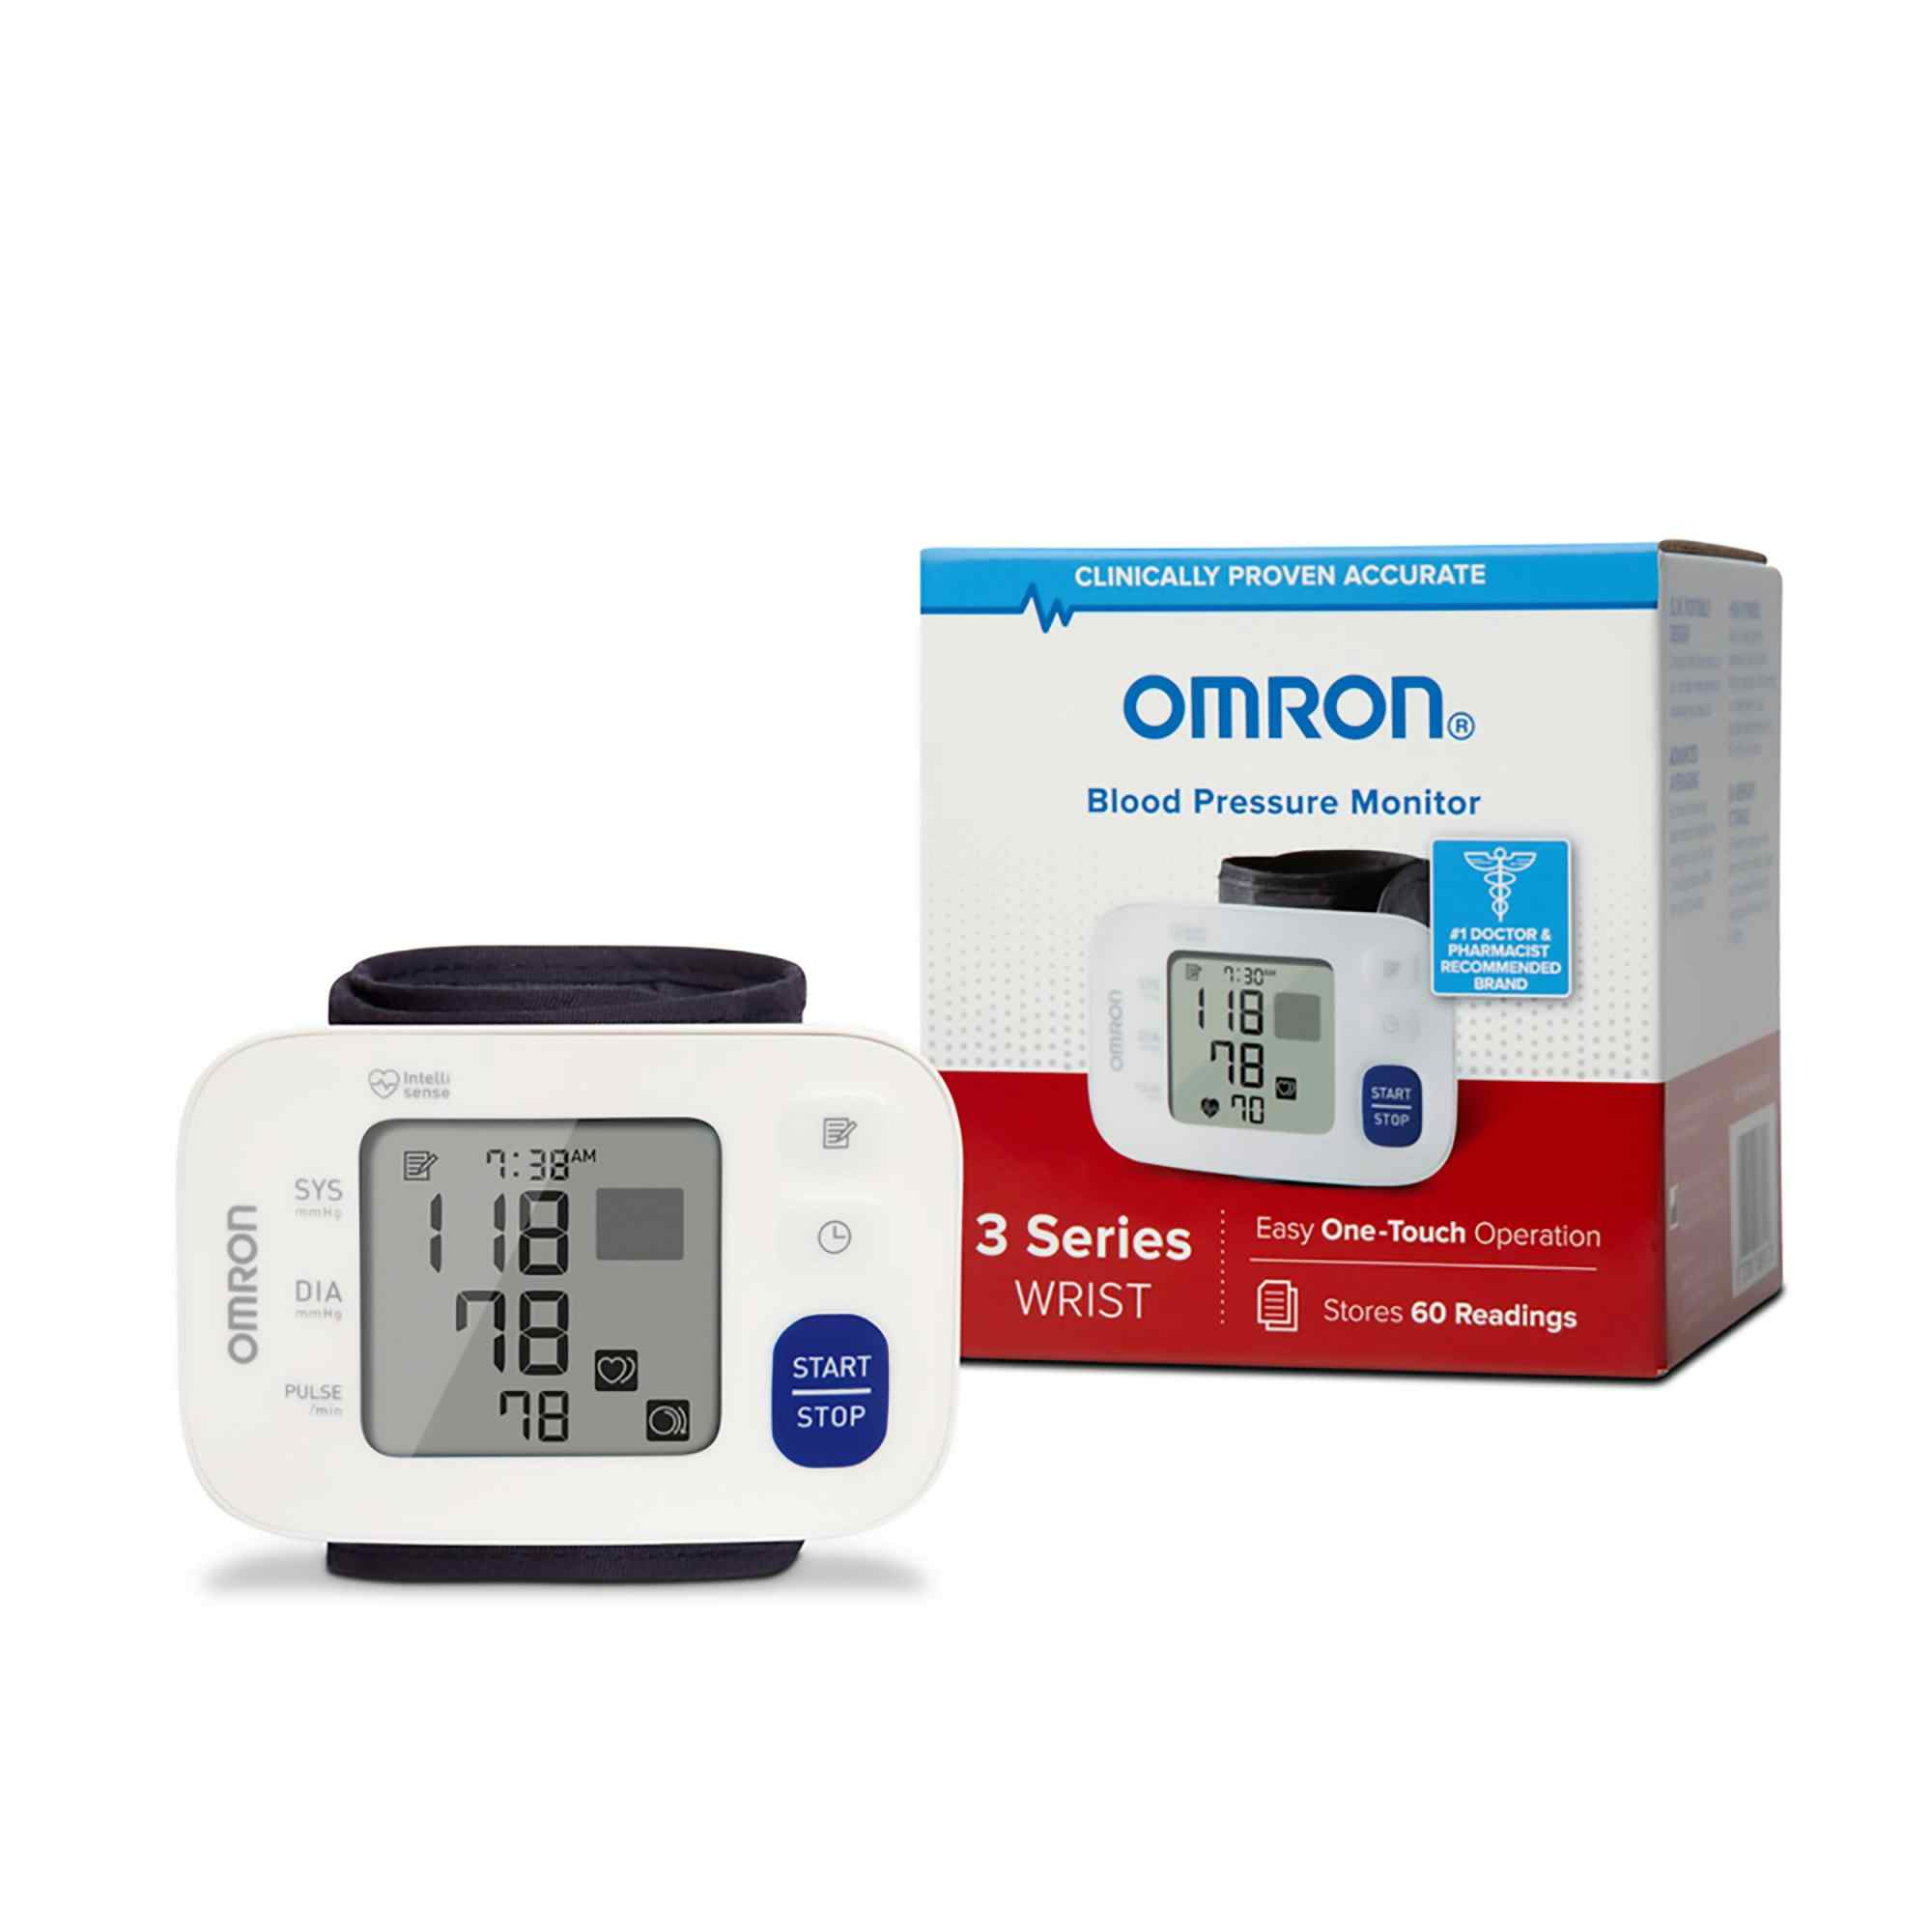 Omron Blood Pressure Monitor, 3 Series Wrist, Easy One-Touch Operation, BP6100, 1 Monitor